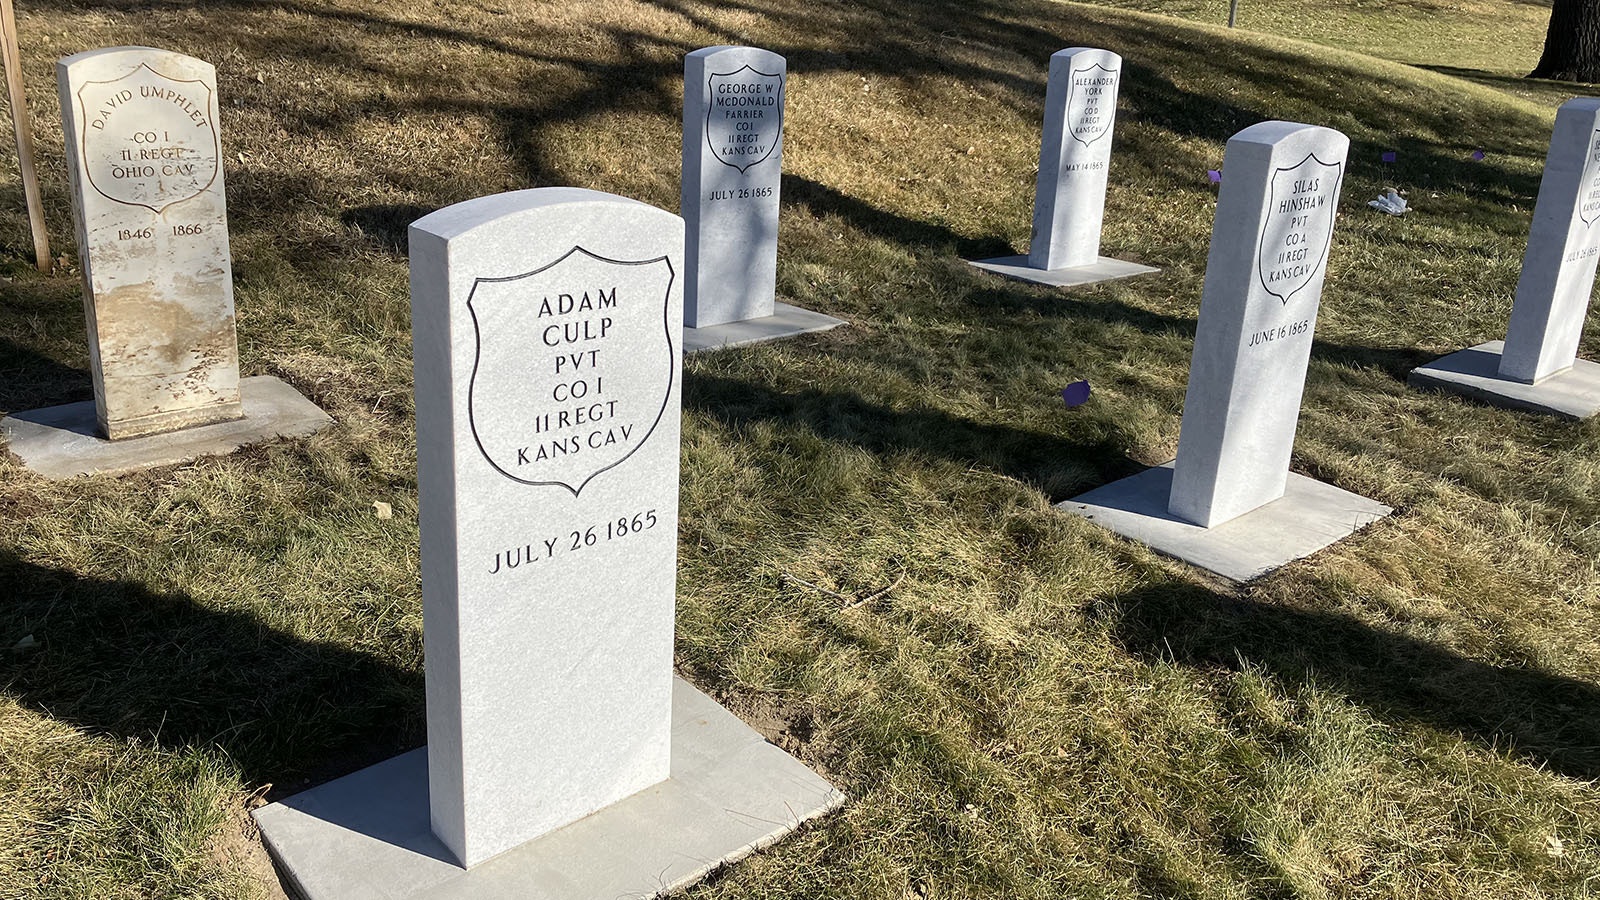 Johanna Wickman is spearheading a project to place headstones for each soldier who died while serving at Fort Caspar.